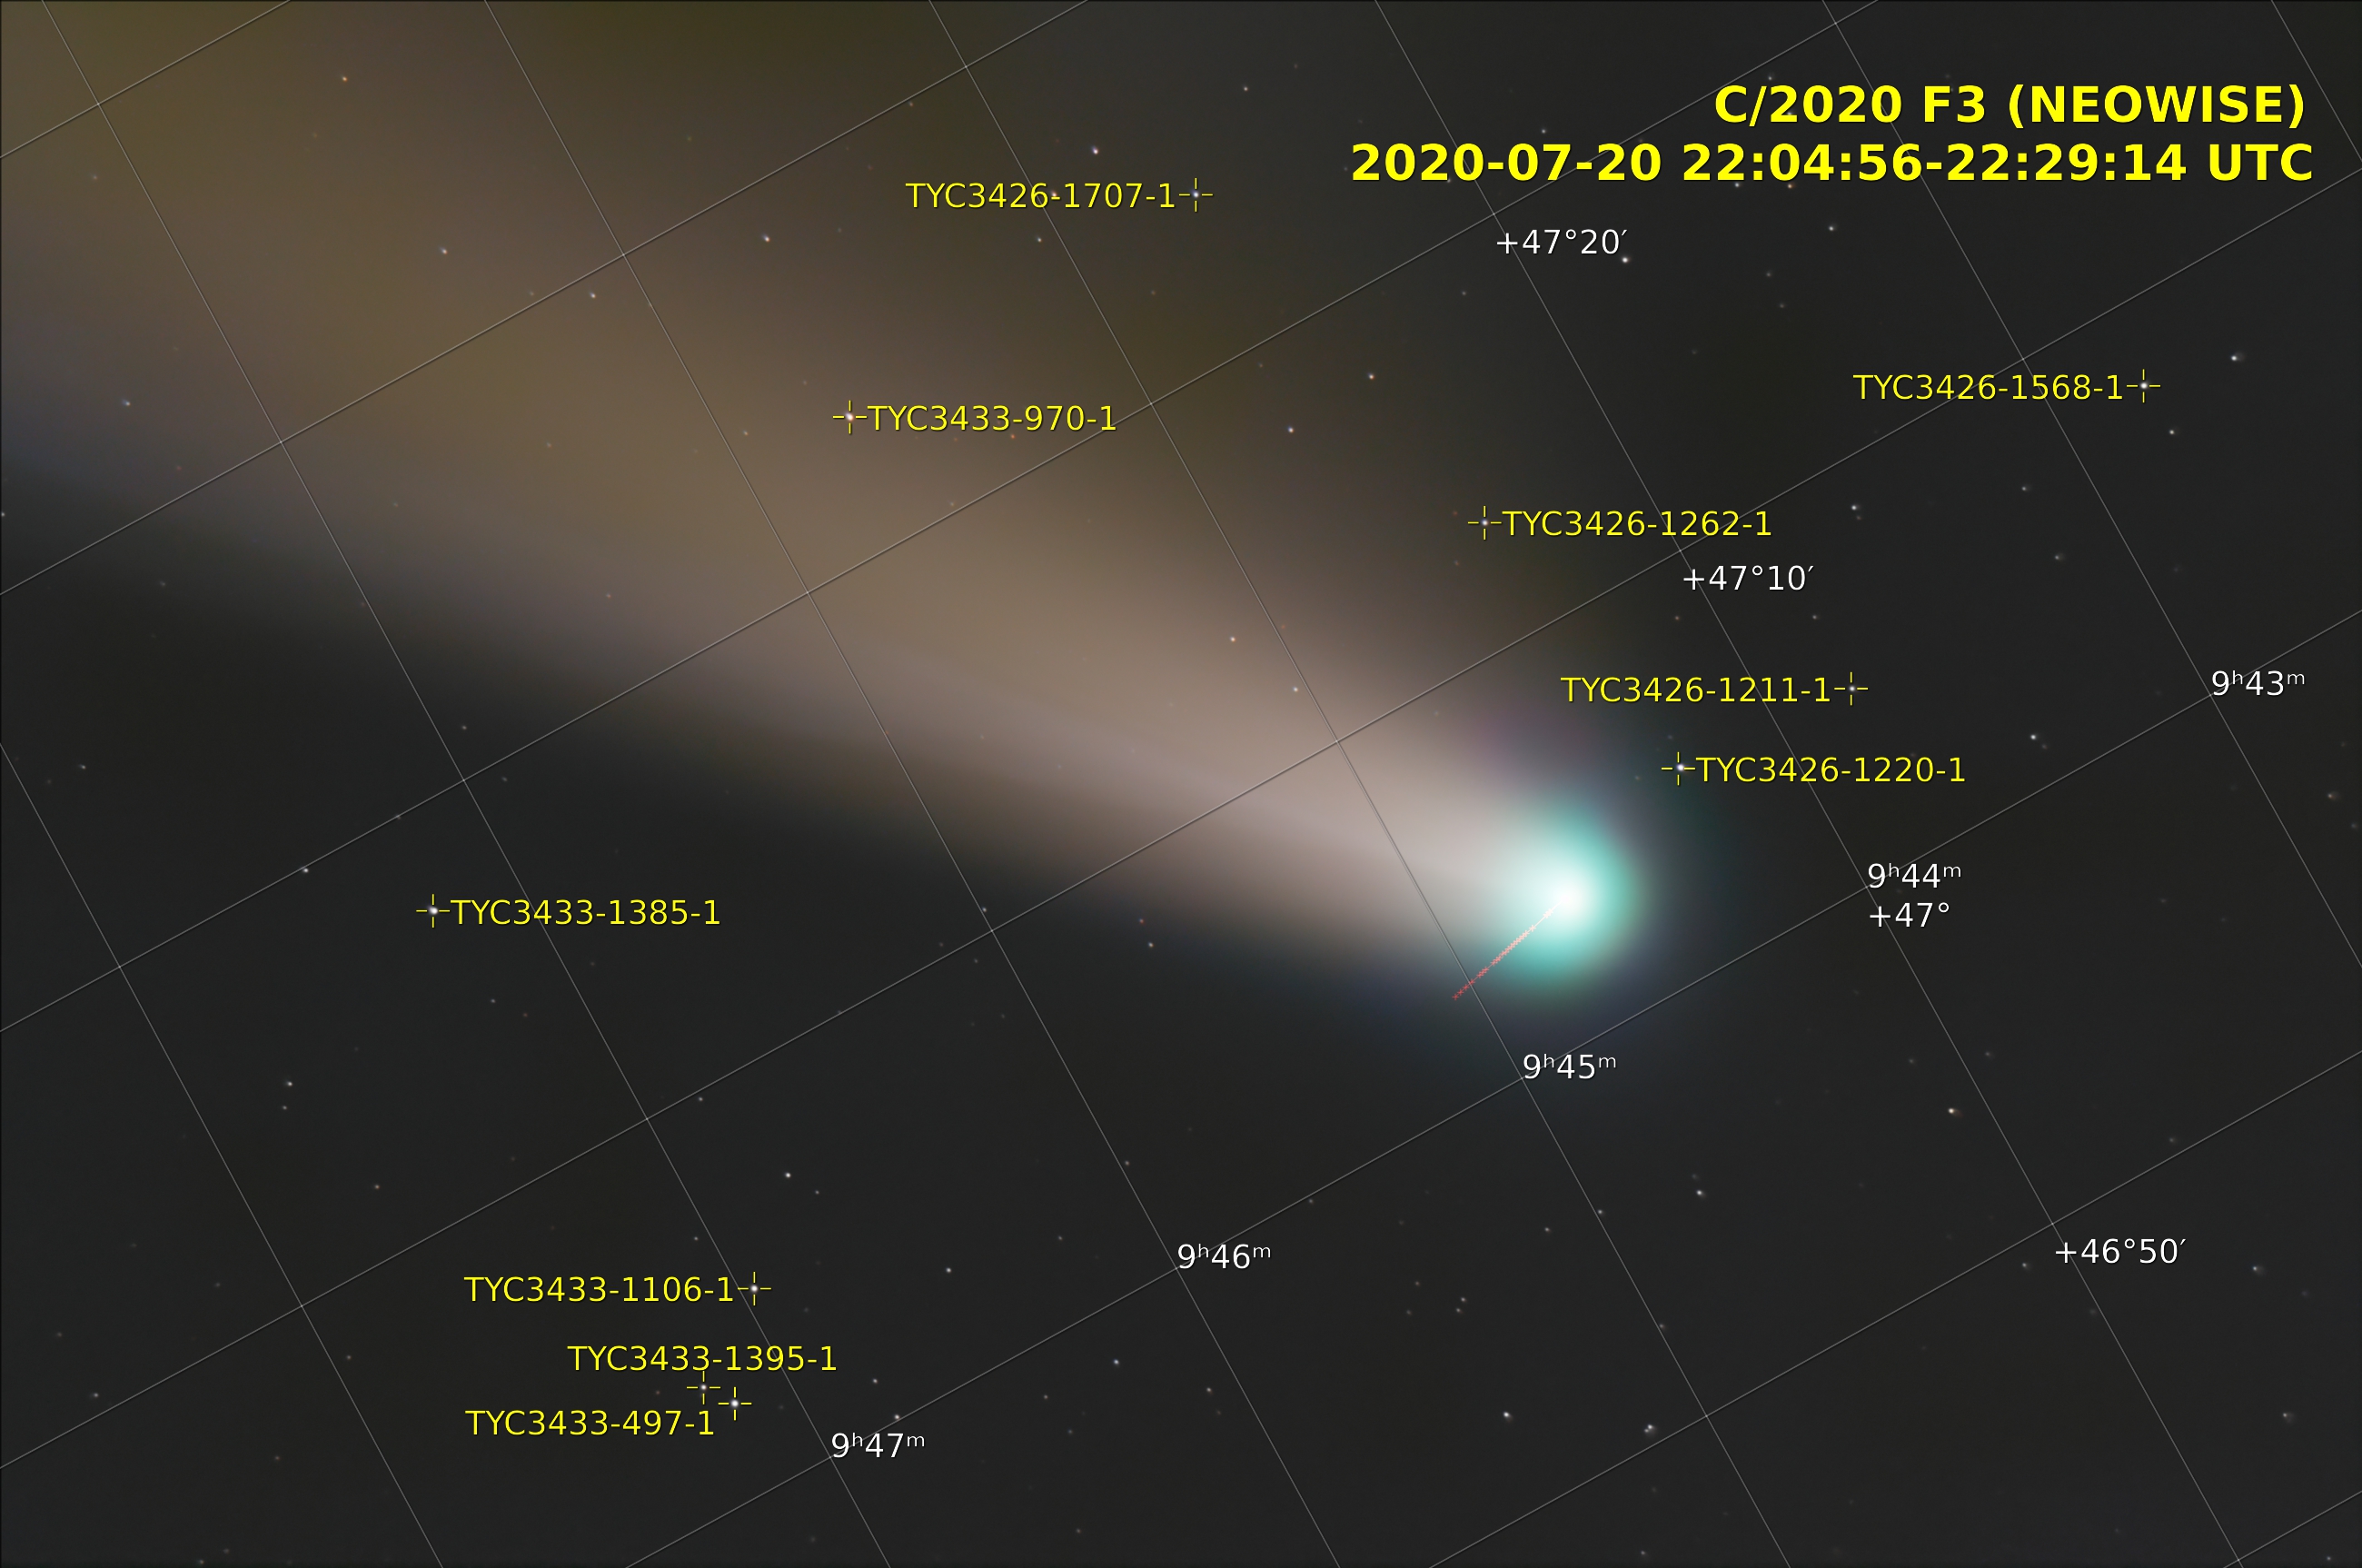 Comet C/2020 F3 (NEOWISE), annotated